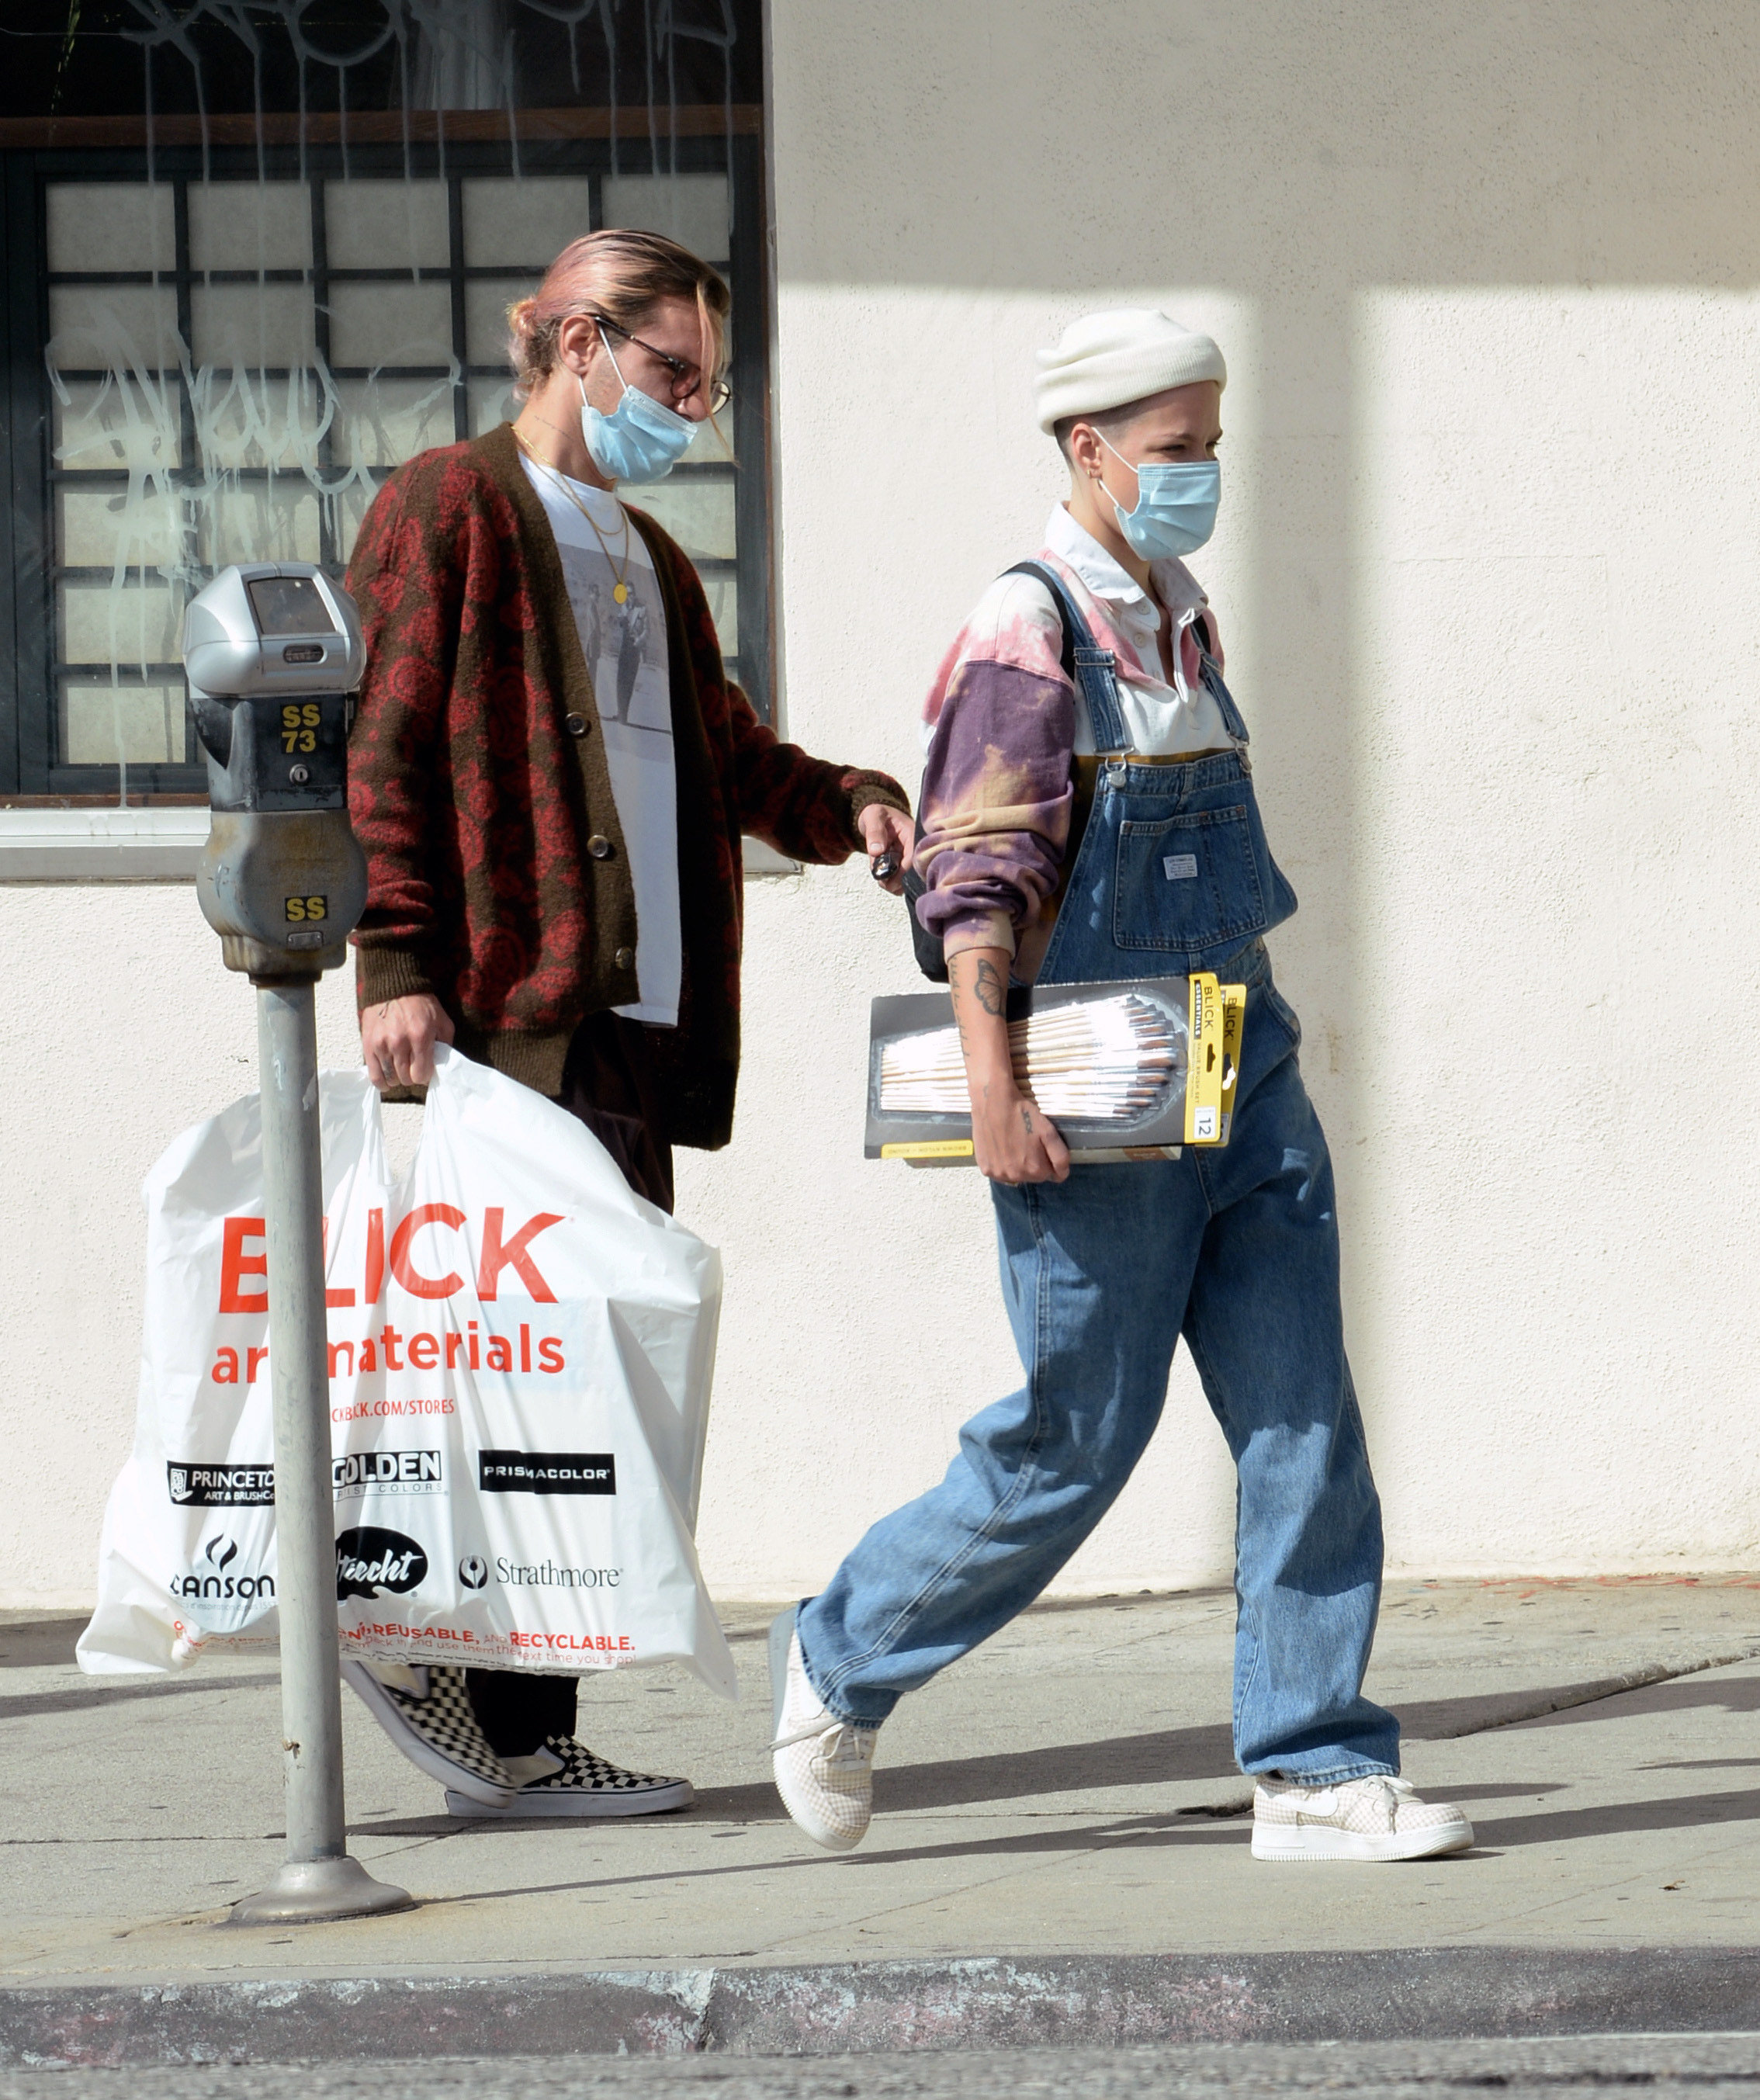 Halsey and Alev walking with items they purchased while casually dressed and wearing face masks